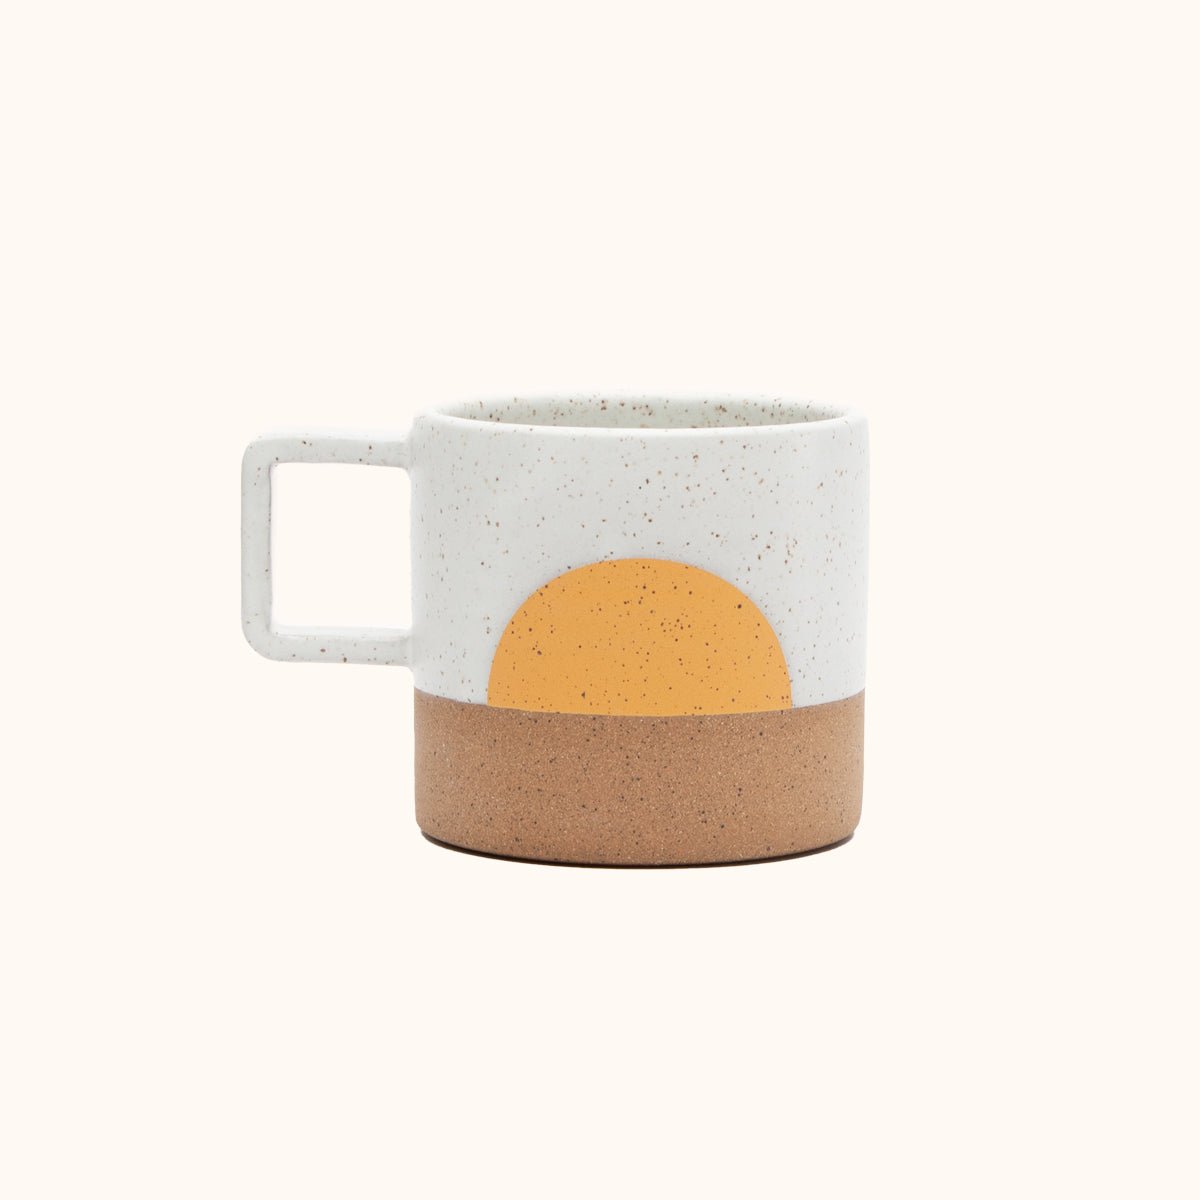 A mug with a white speckled and natural clay finish with a half moon design in a warm yellow. The Speckled Sunrise Mug is designed and handmade by Wolf Ceramics in Hood River, Oregon.